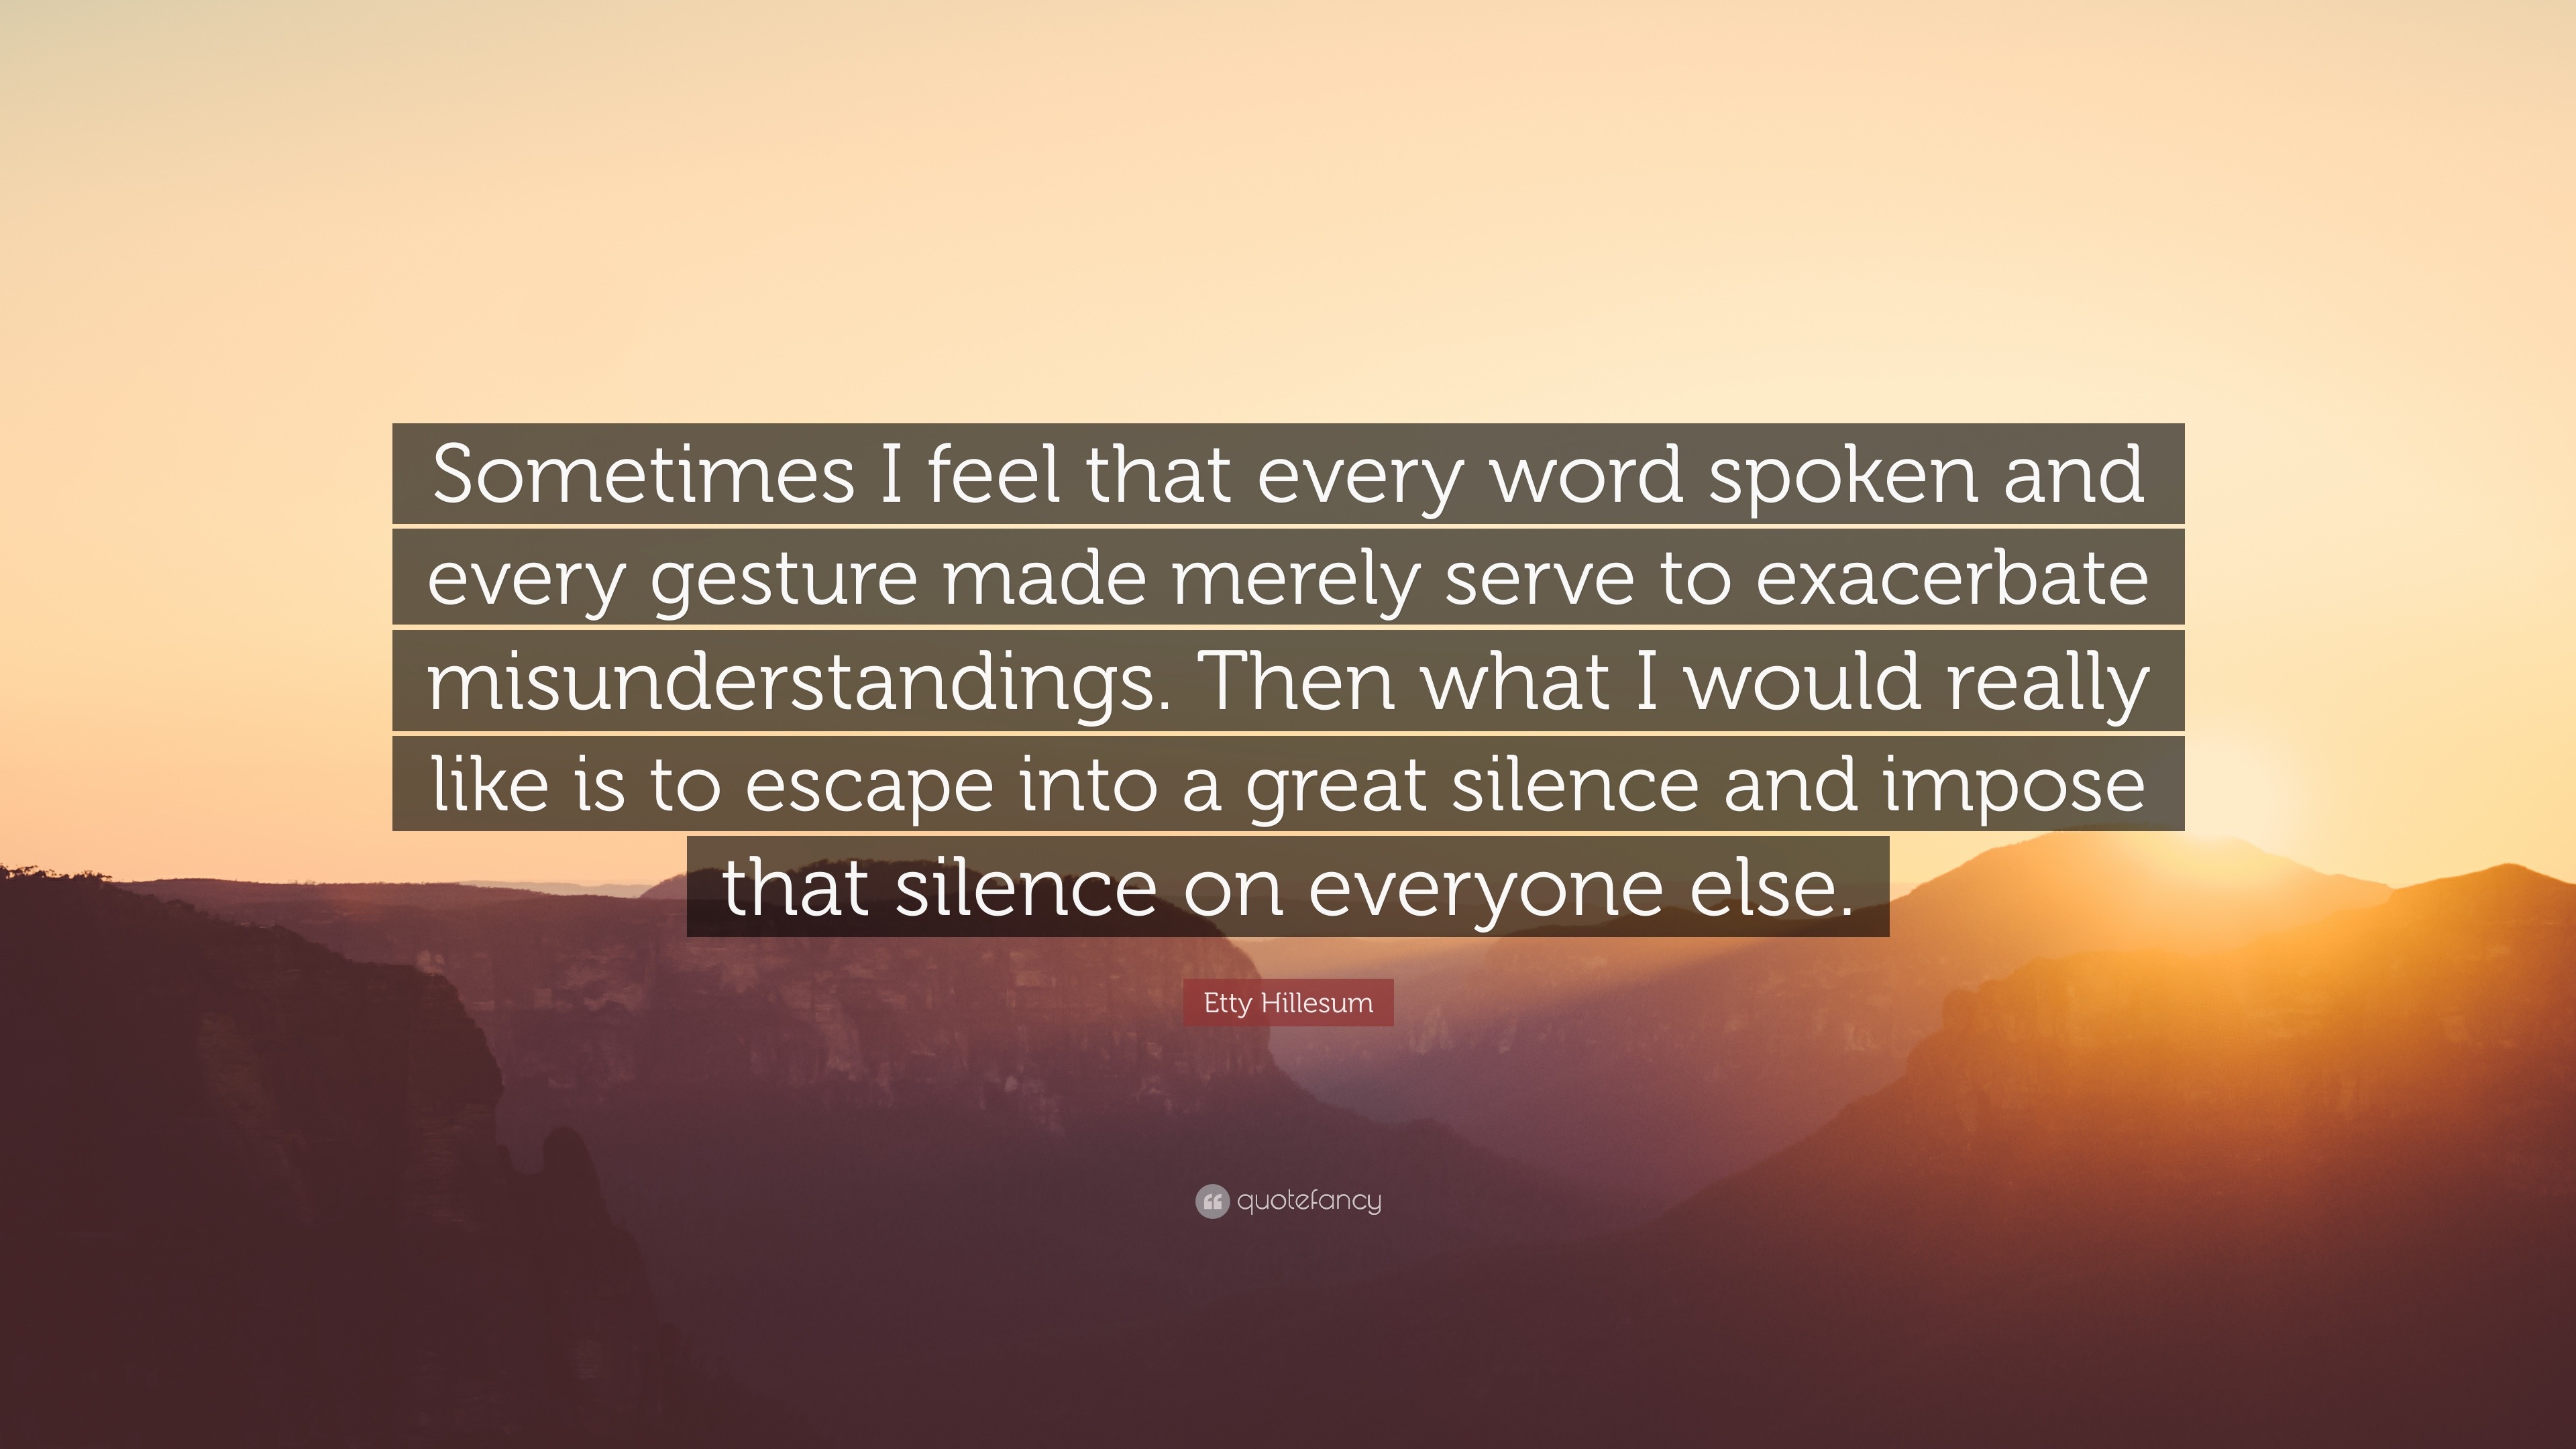 Etty Hillesum Quote “Sometimes I feel that every word spoken and every